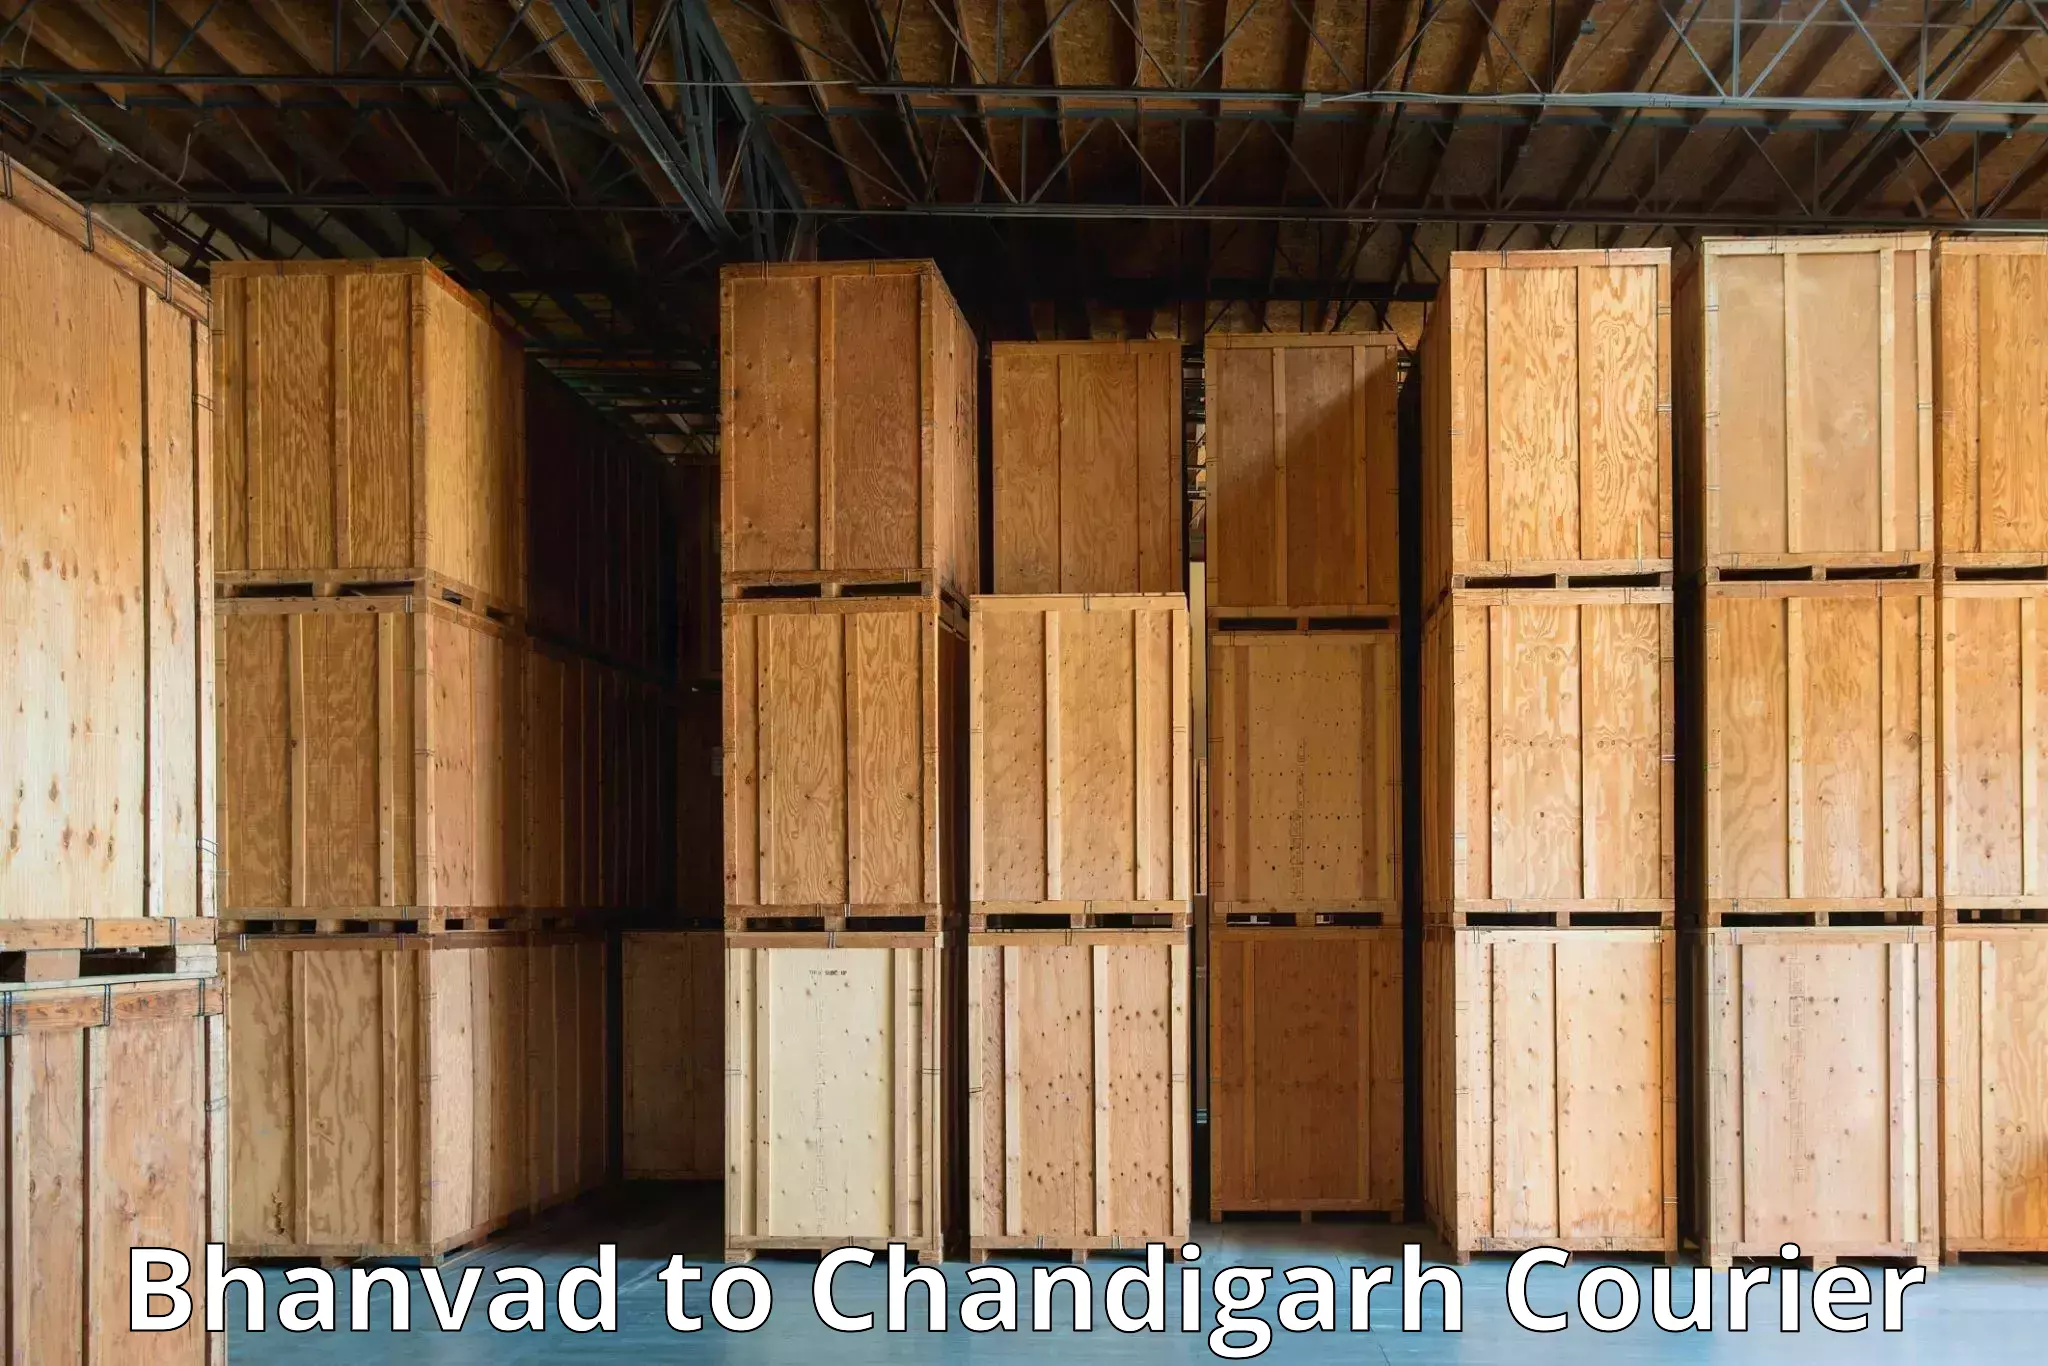 Global shipping networks Bhanvad to Chandigarh